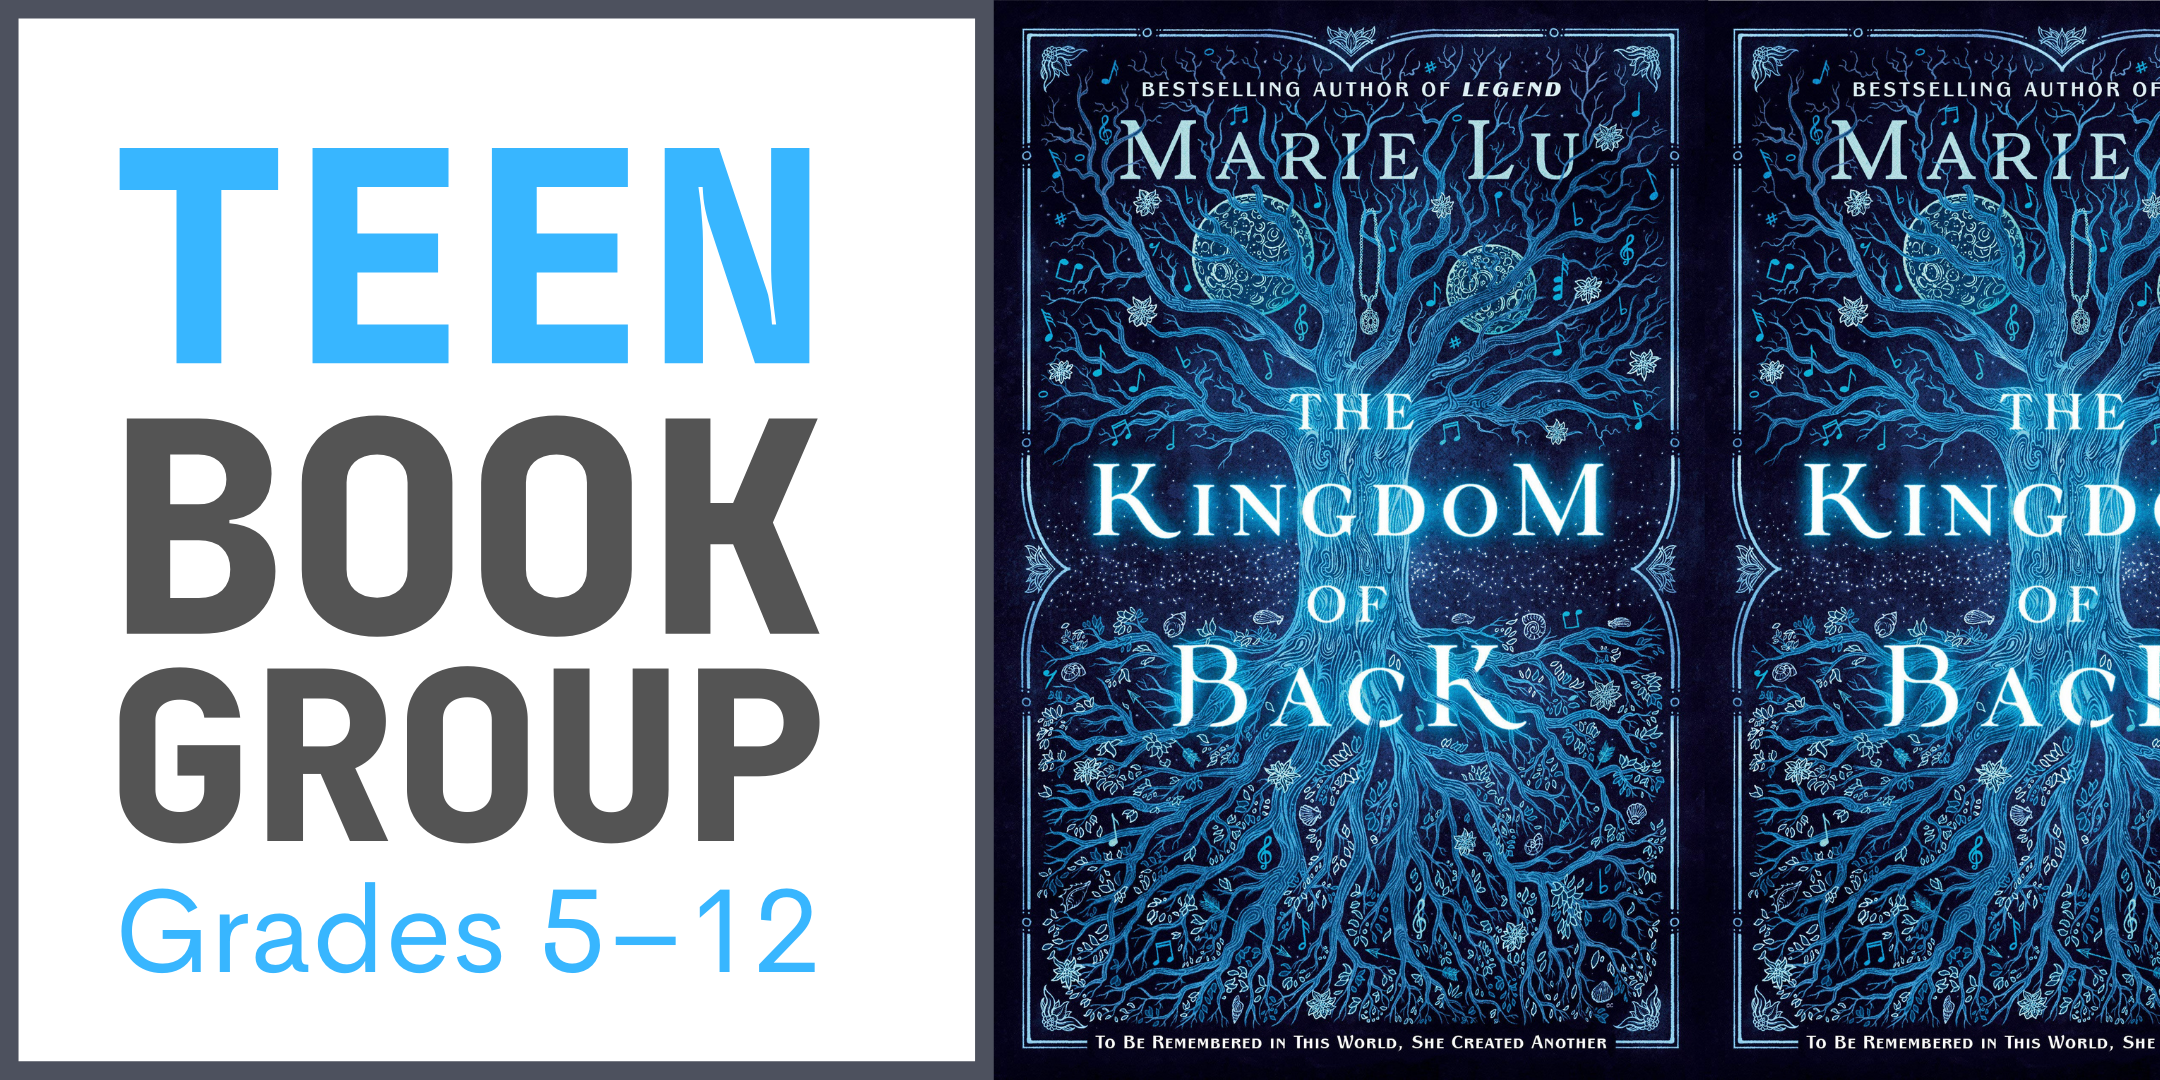 Teen Book Group: Grades 5-12 featuring The Kingdom of Back book cover image